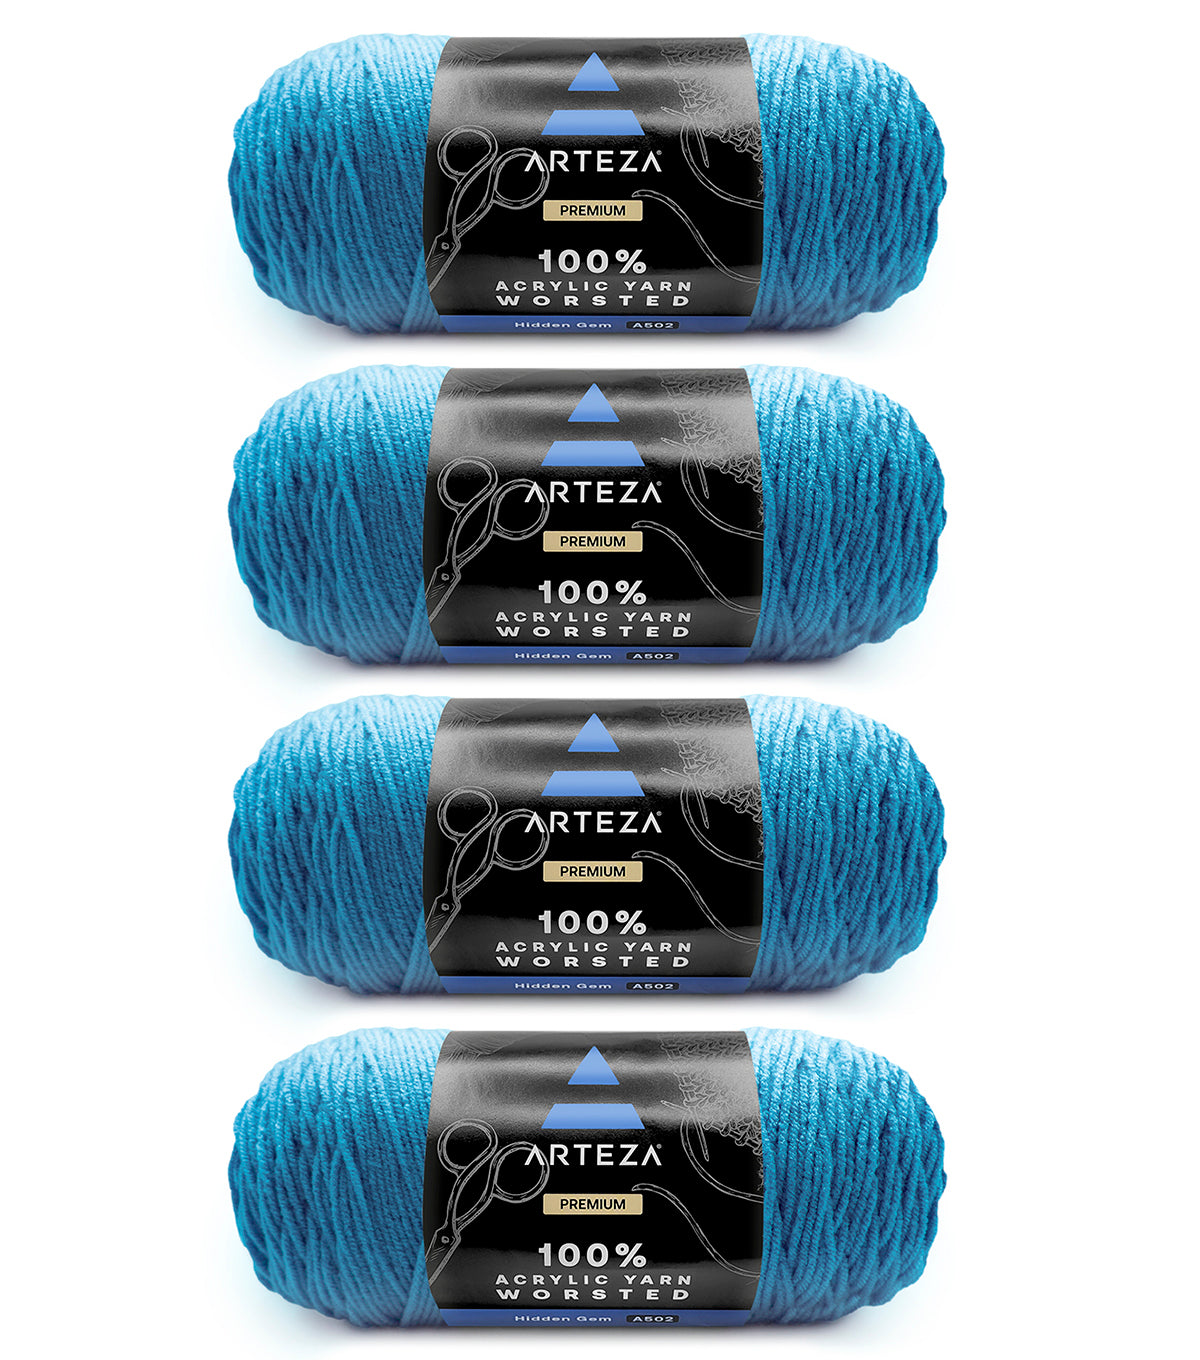  Arteza Acrylic Yarn for Crocheting, 4 x 200-g Skeins of  Worsted Yarn for Knitting, Hello Sunshine A102, Machine Washable, Knitting  & Crochet Supplies – Use with Knitting Needles and Crochet